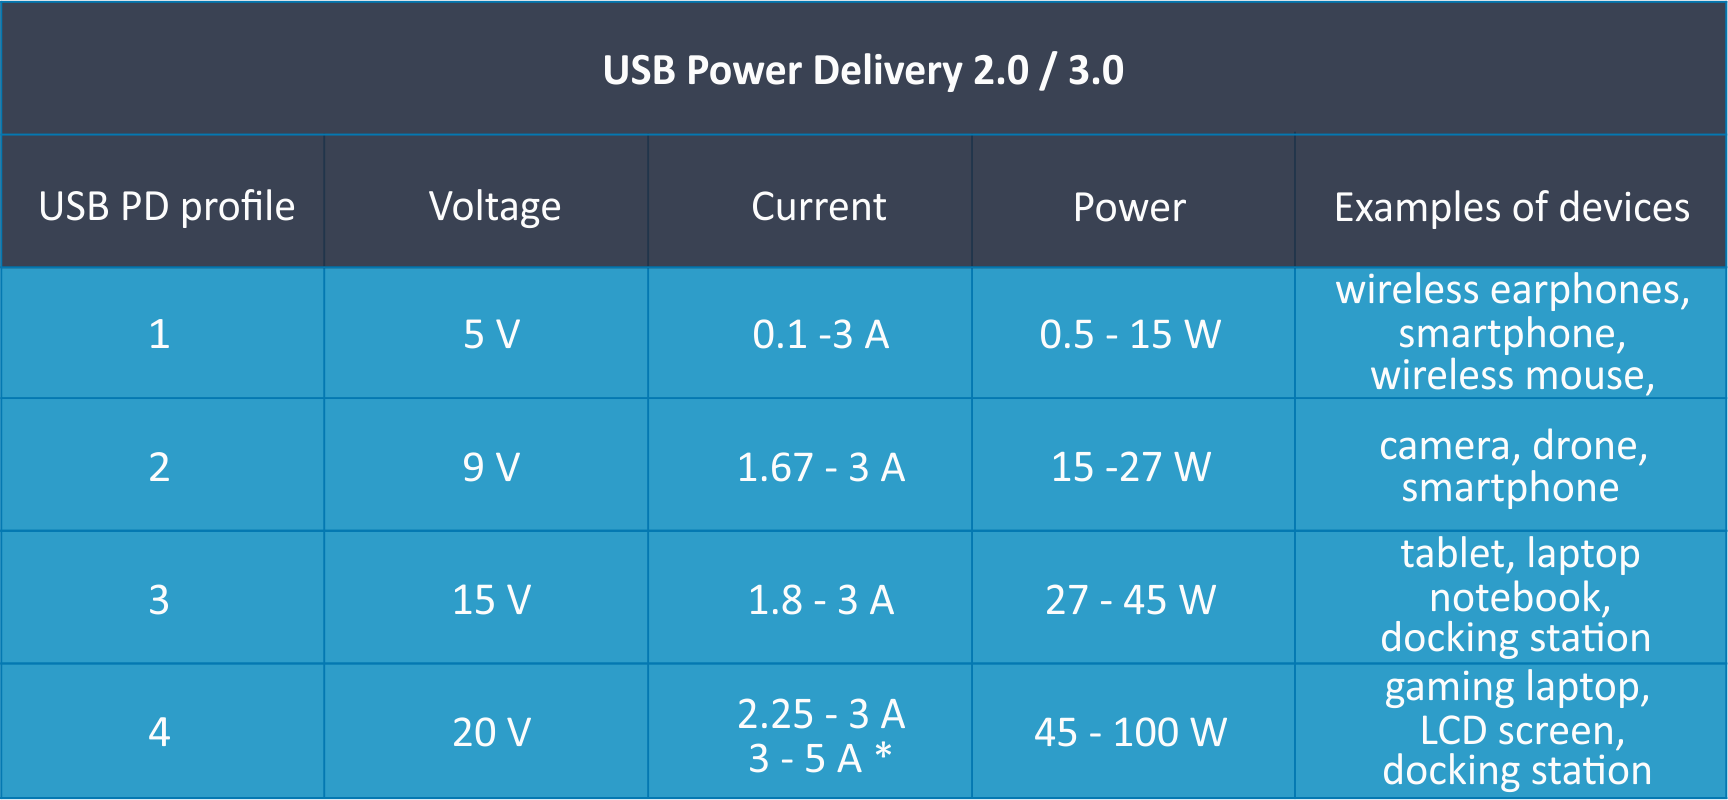 table with USB Power Delivery 2.0 and 3.0 parameters